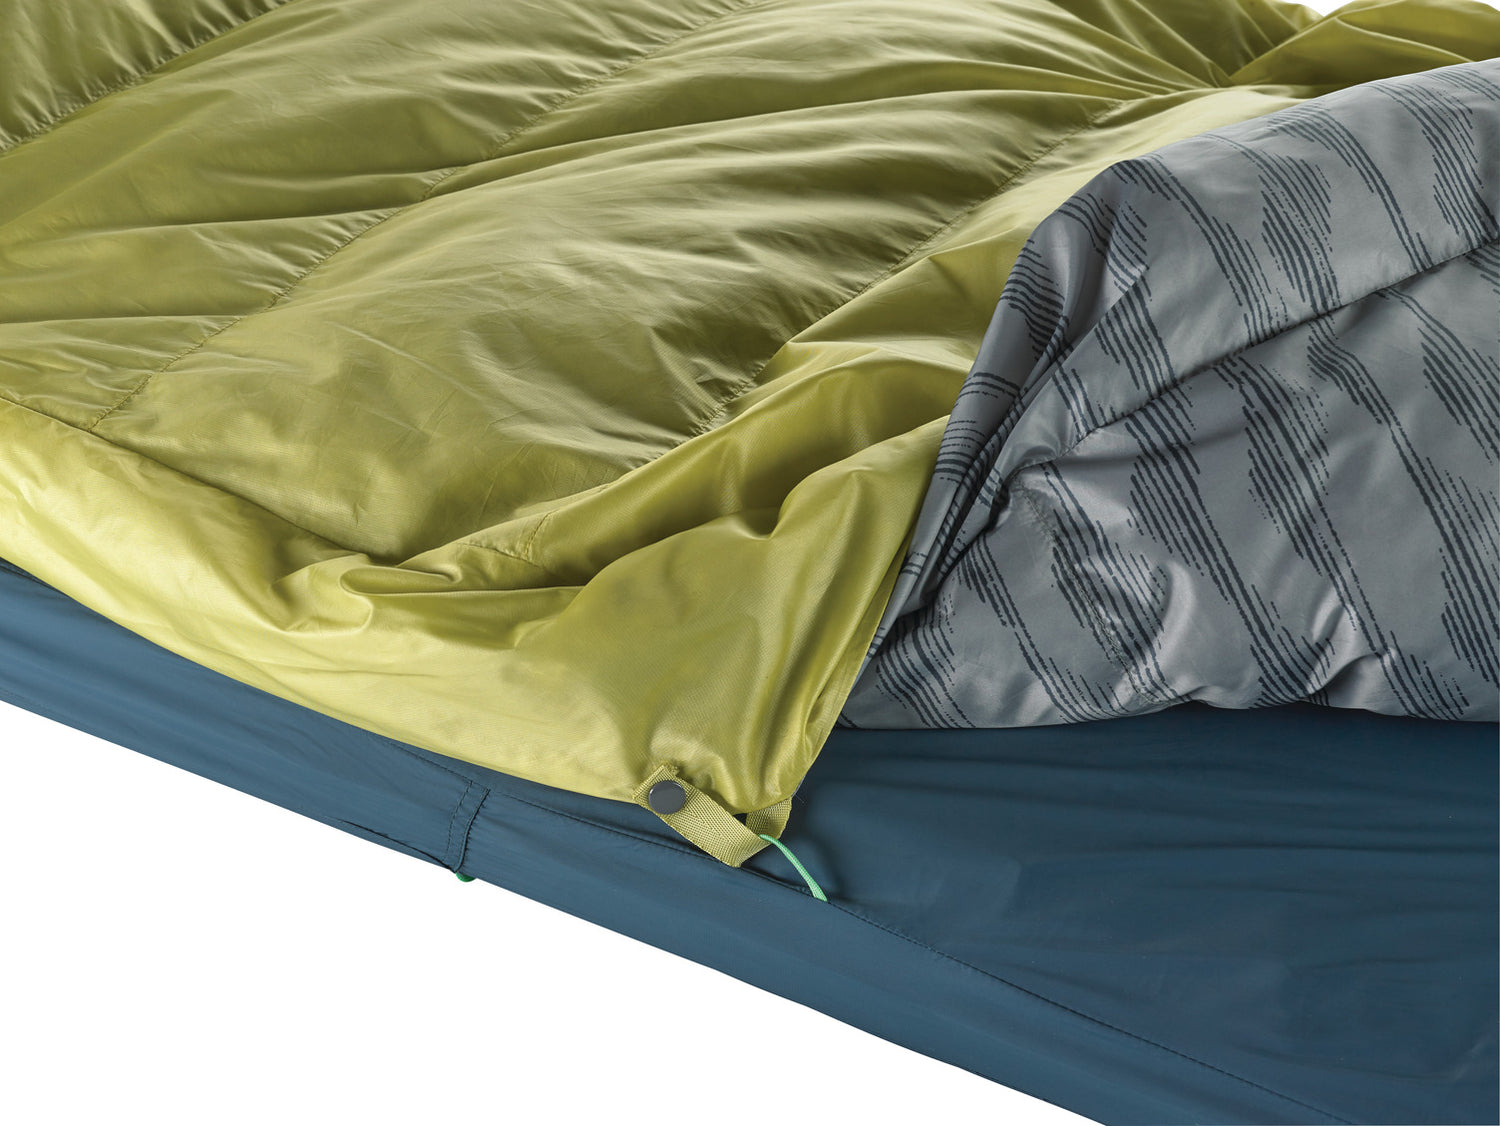 Thermarest Synergy Lite Sheet 25